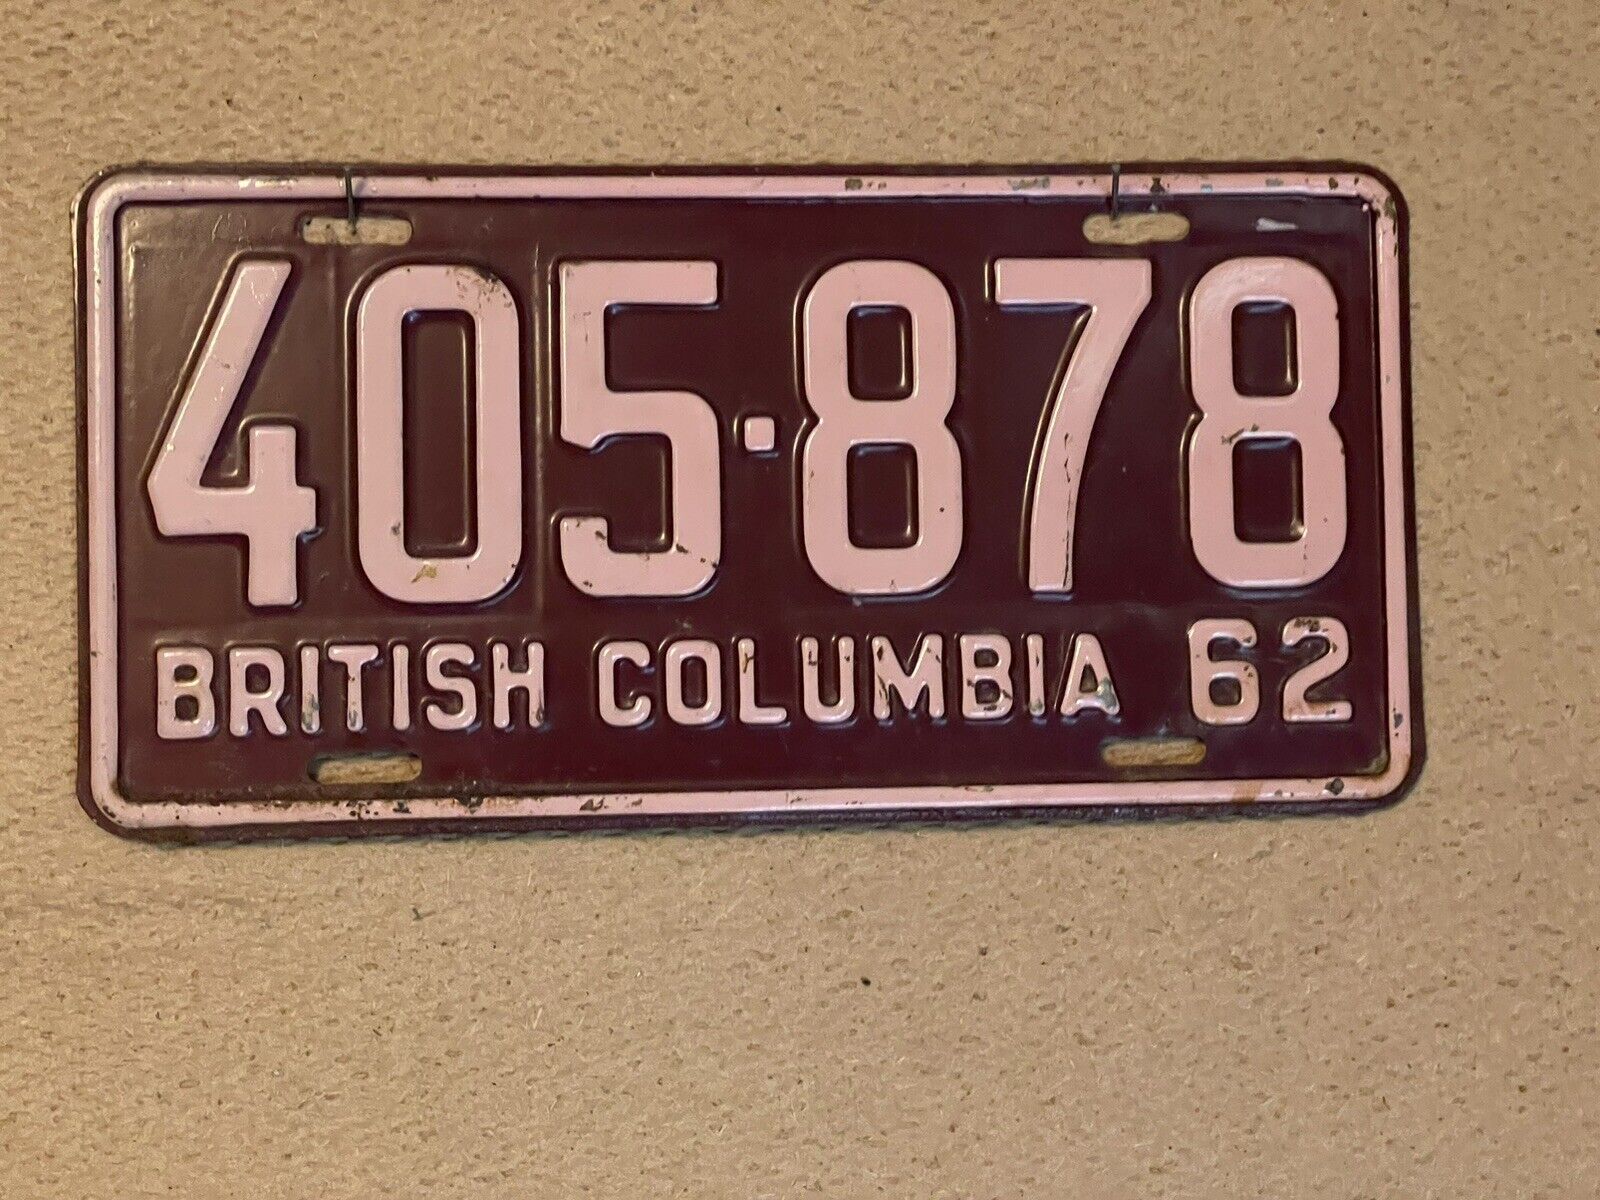 1962 BRITISH COLUMBIA BC CANADA LICENSE PLATE # 405 878 PINK AND WINE COLOR